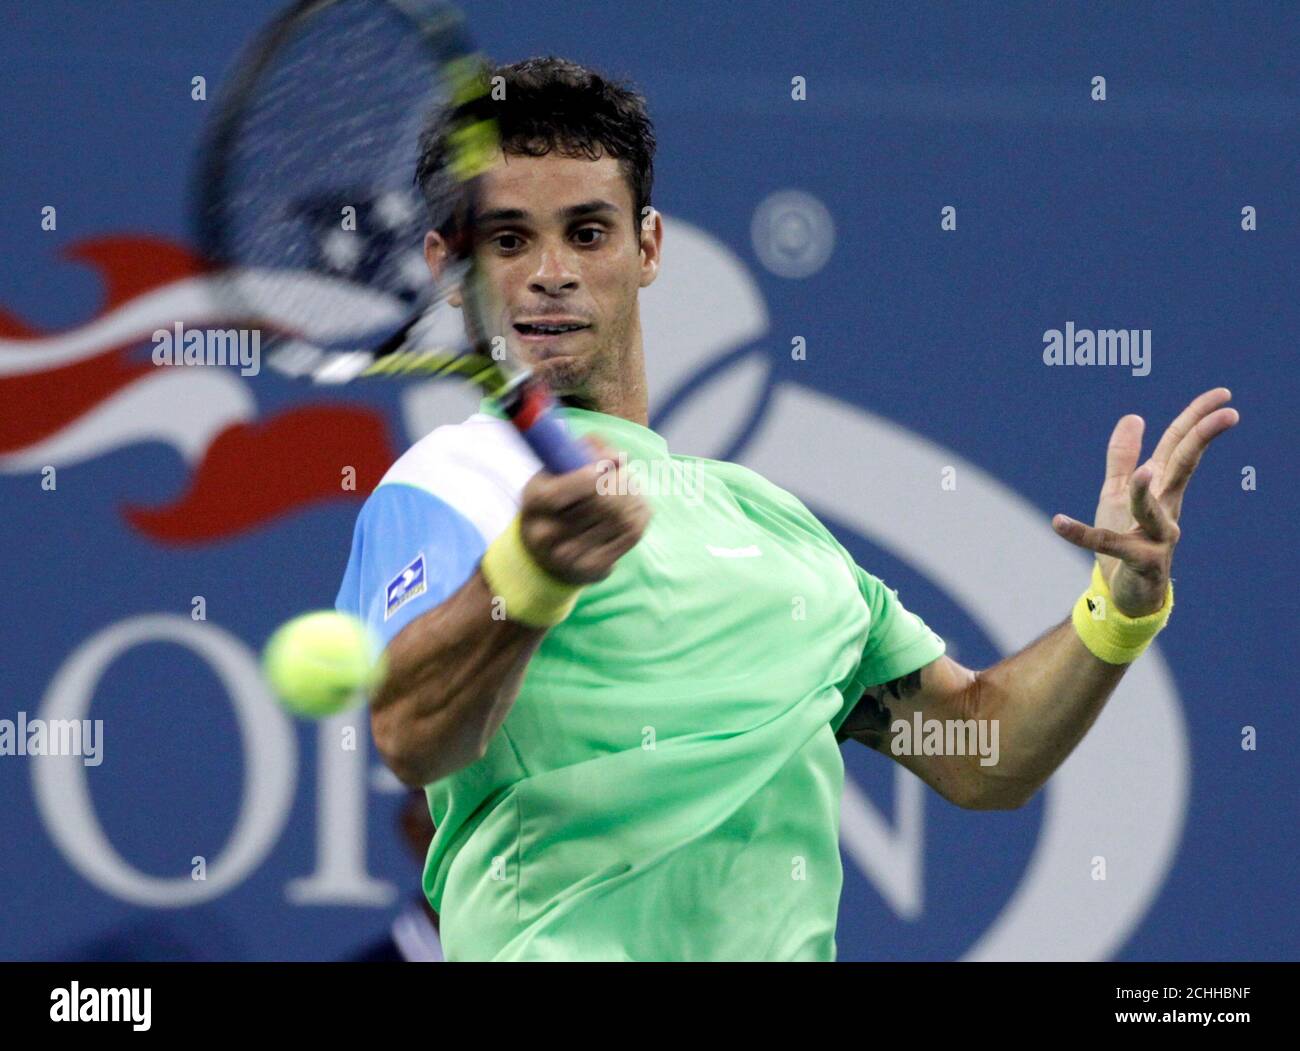 Rogerio Dutra Silva of Brazil returns a forehand to Rafael Nadal of Spain at the U.S. Open tennis championships in New York, August 29, 2013. REUTERS/Shannon Stapleton (UNITED STATES - Tags: SPORT TENNIS) Stock Photo